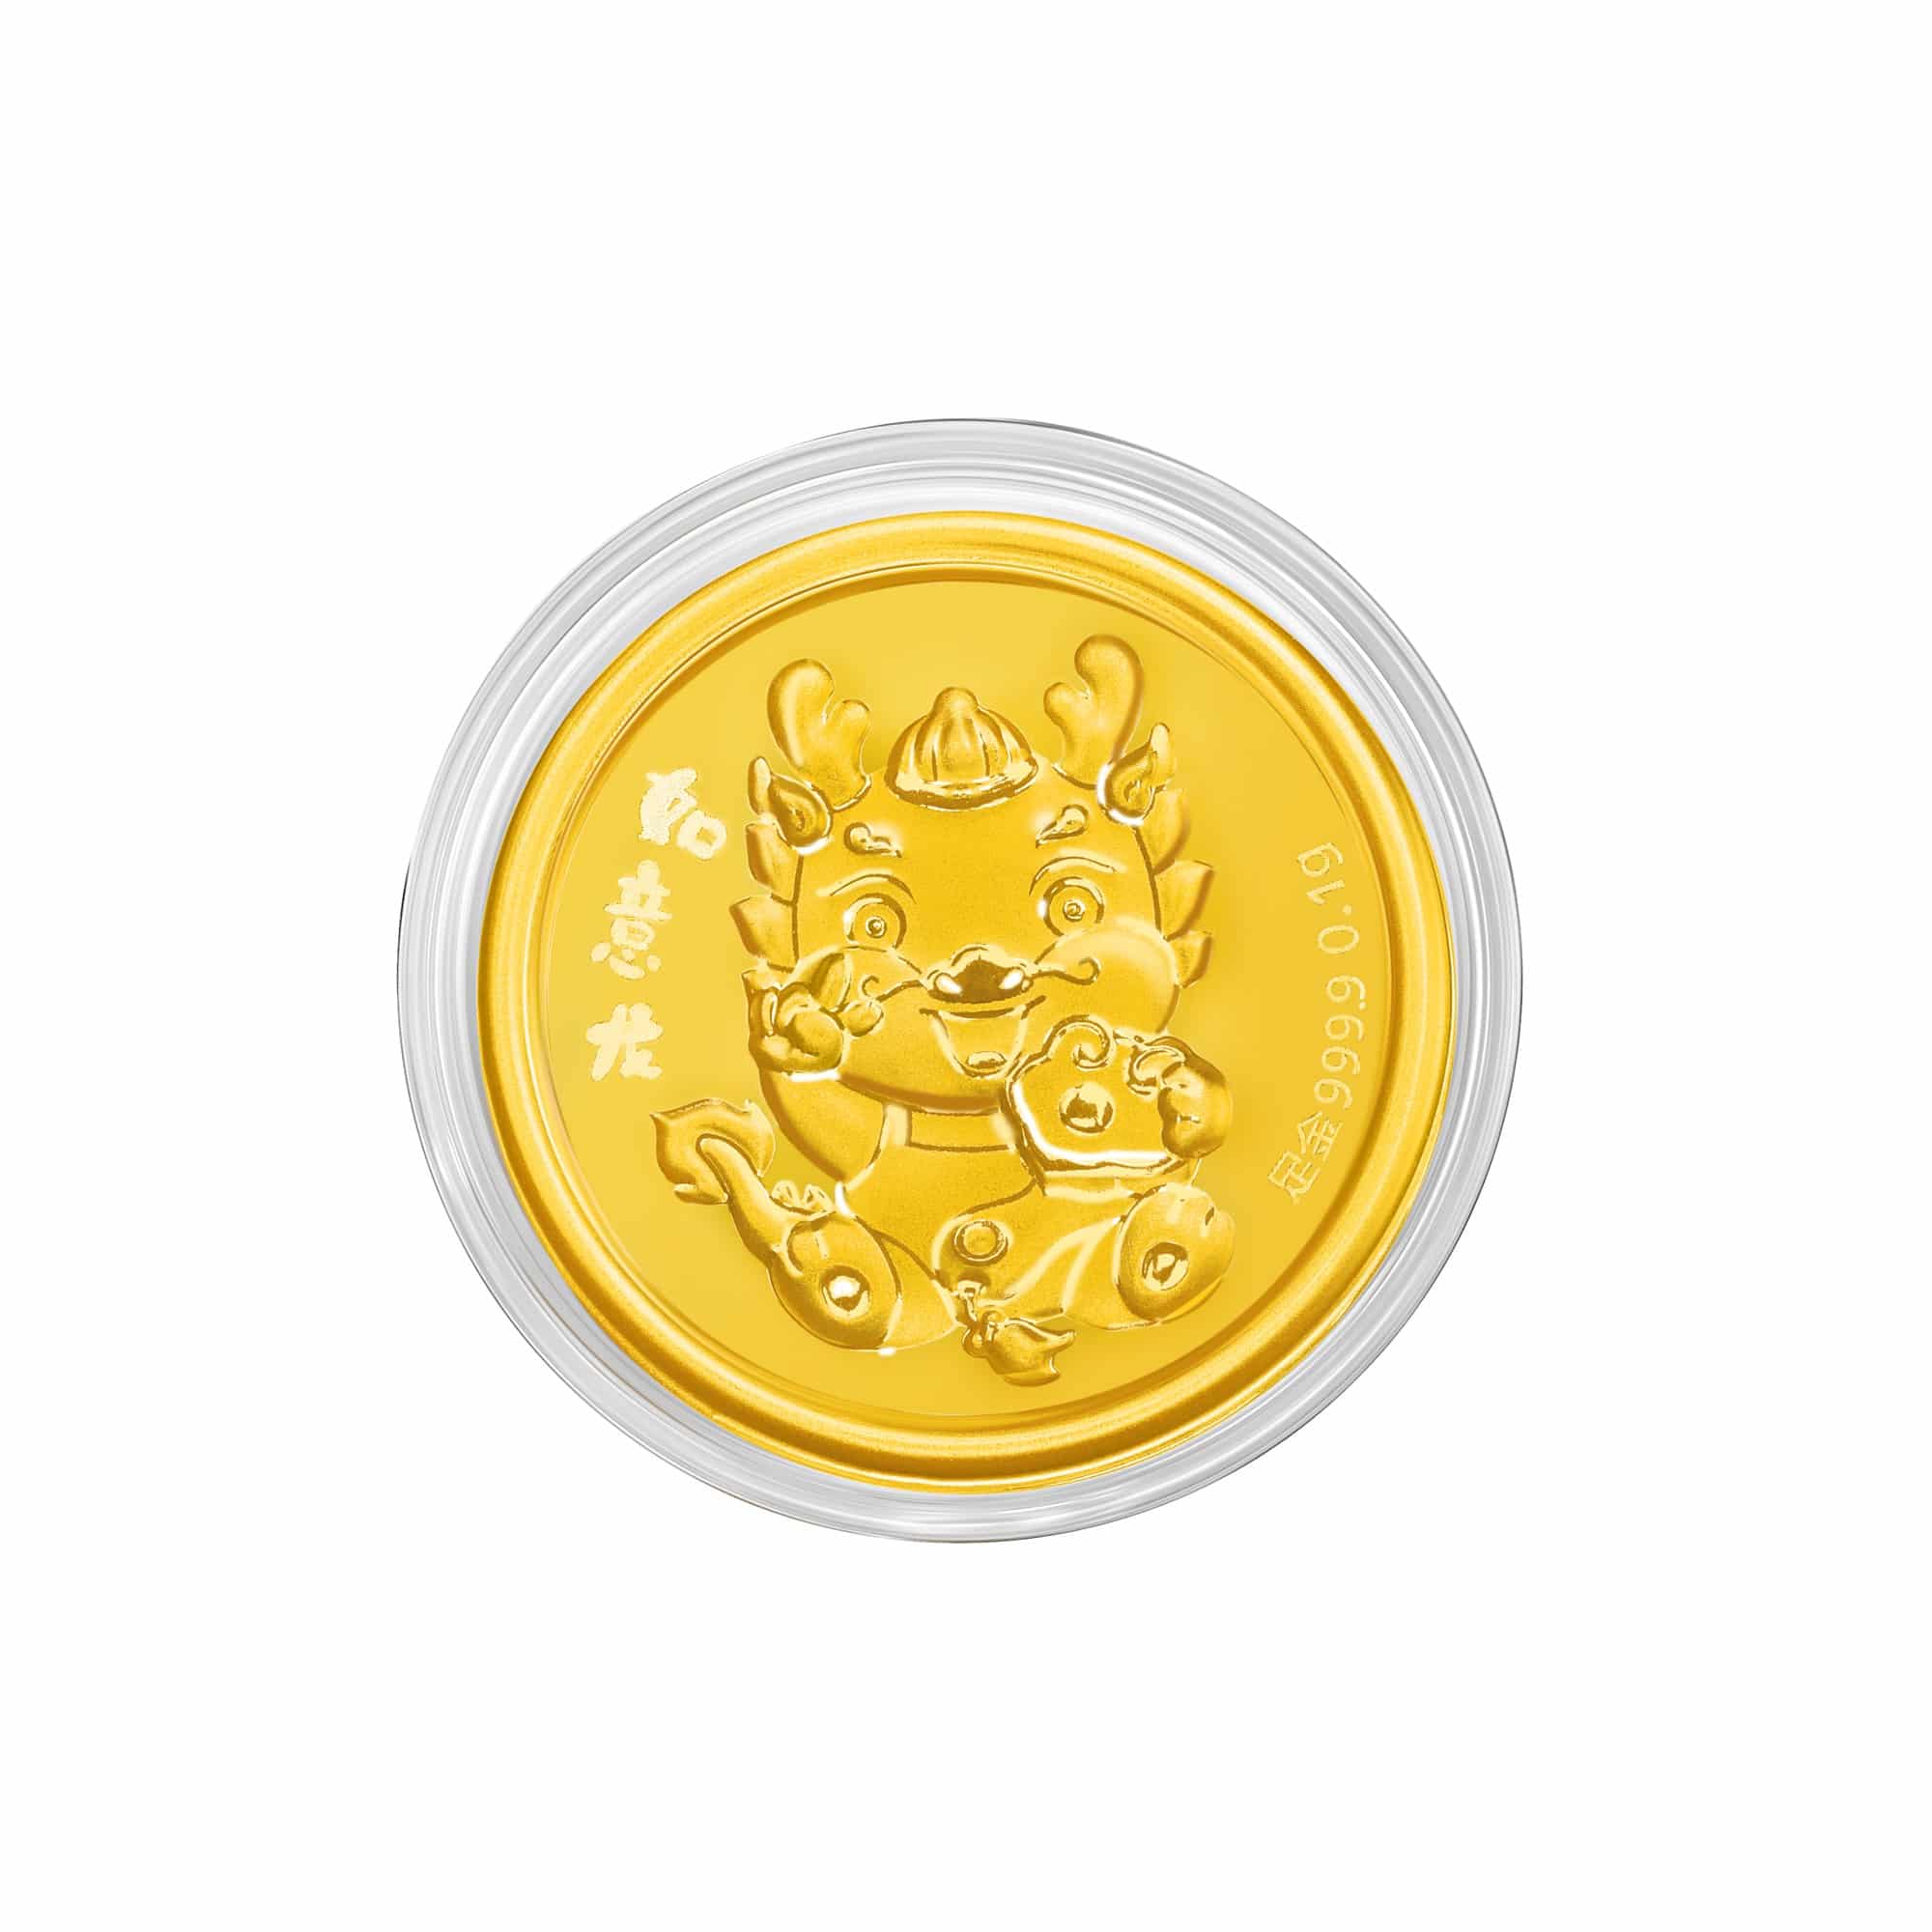 Smooth Sailing Dragon Coin in 999 Gold